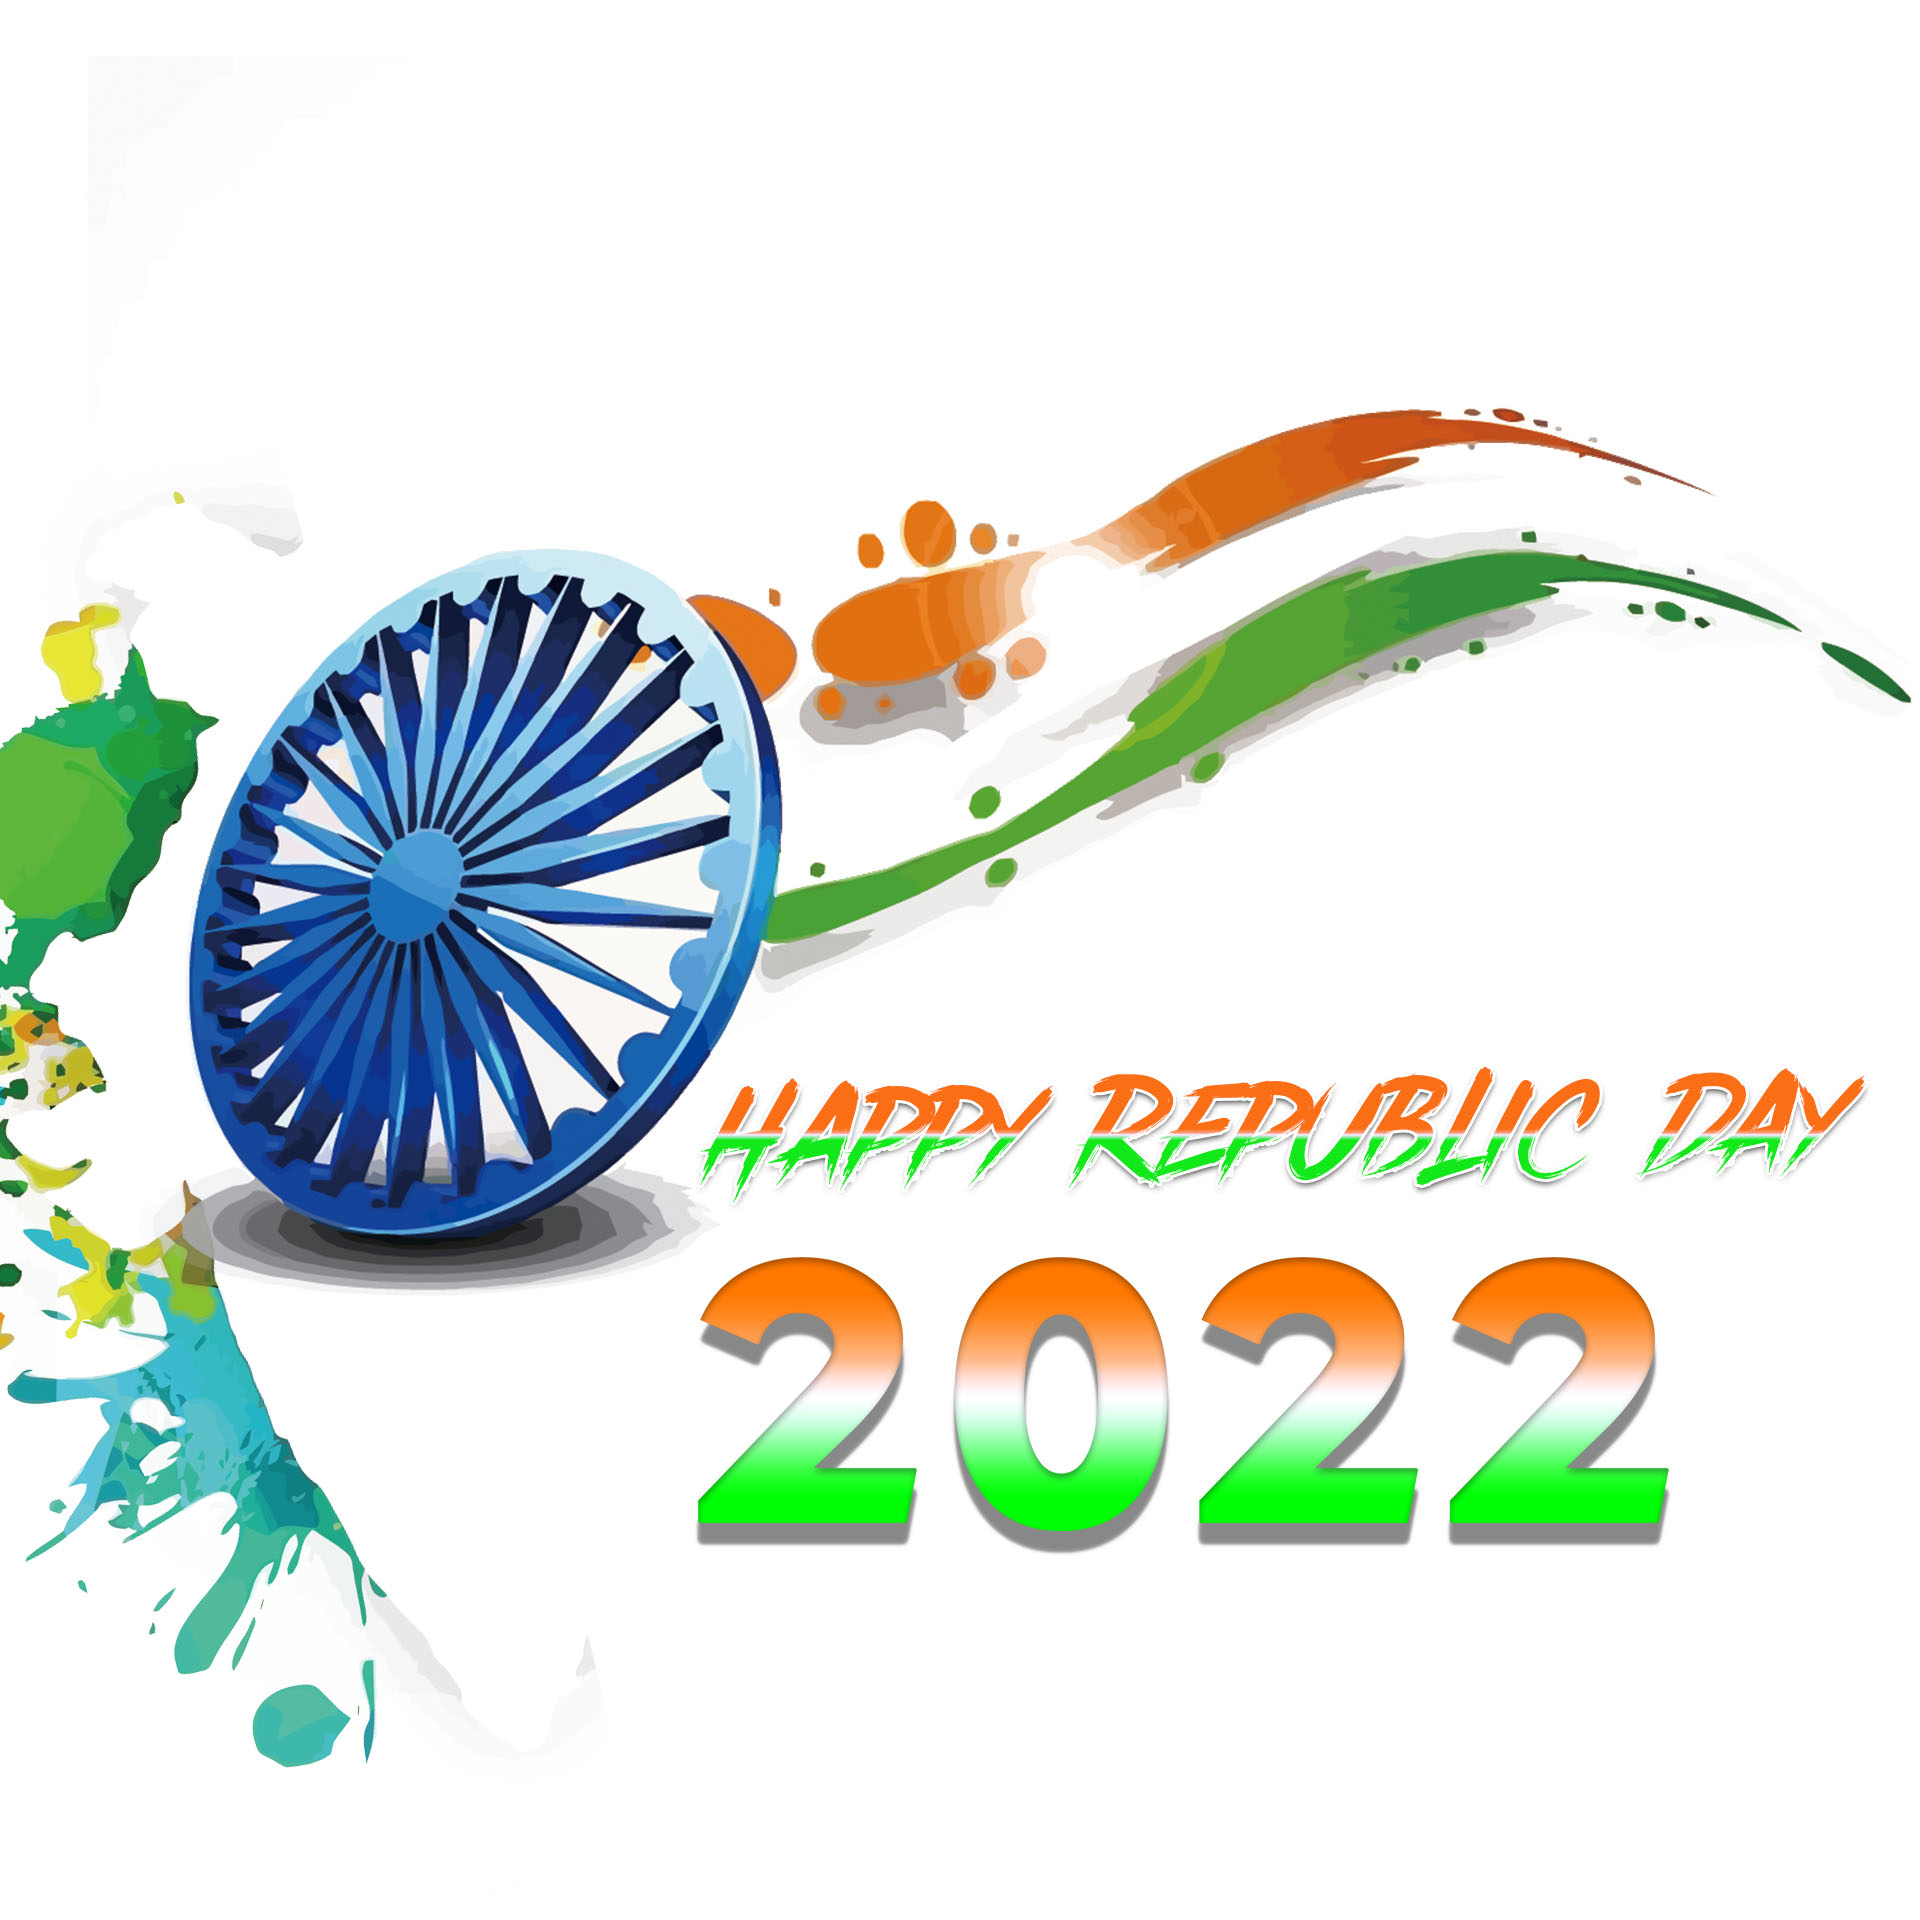 26 January Happy Republic Day 2022 Images Download Free